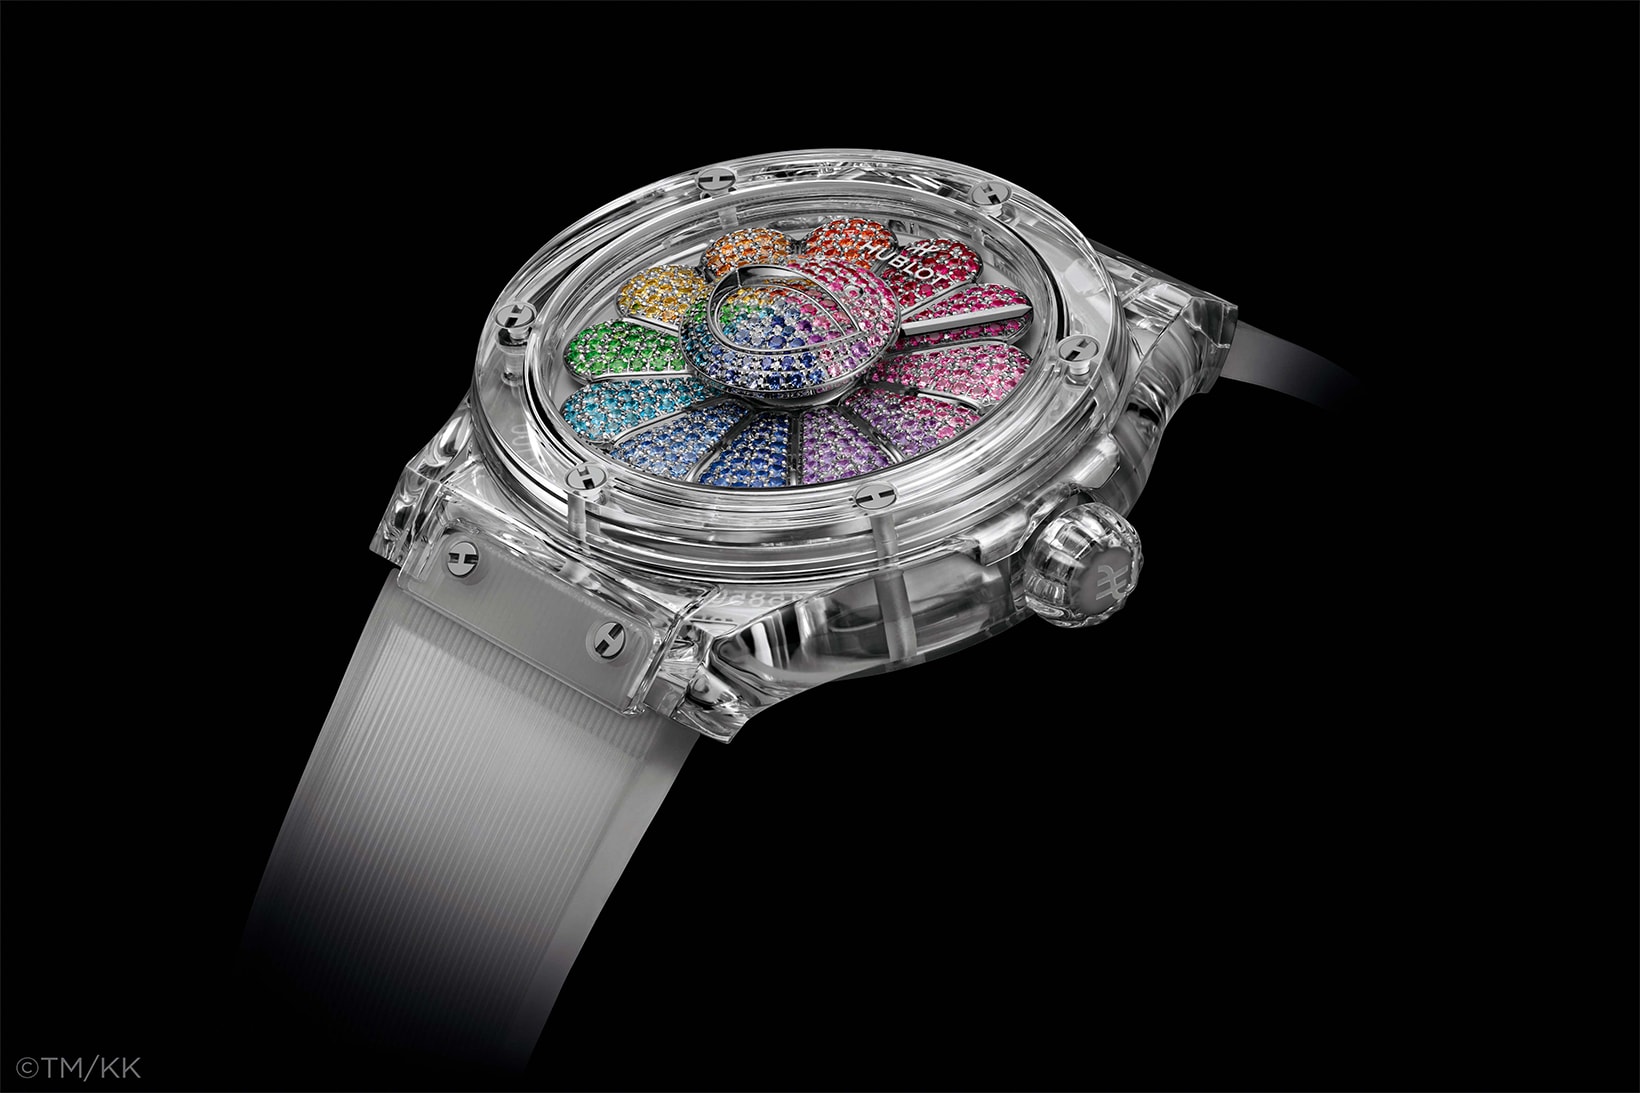 Side view of the rainbow watch